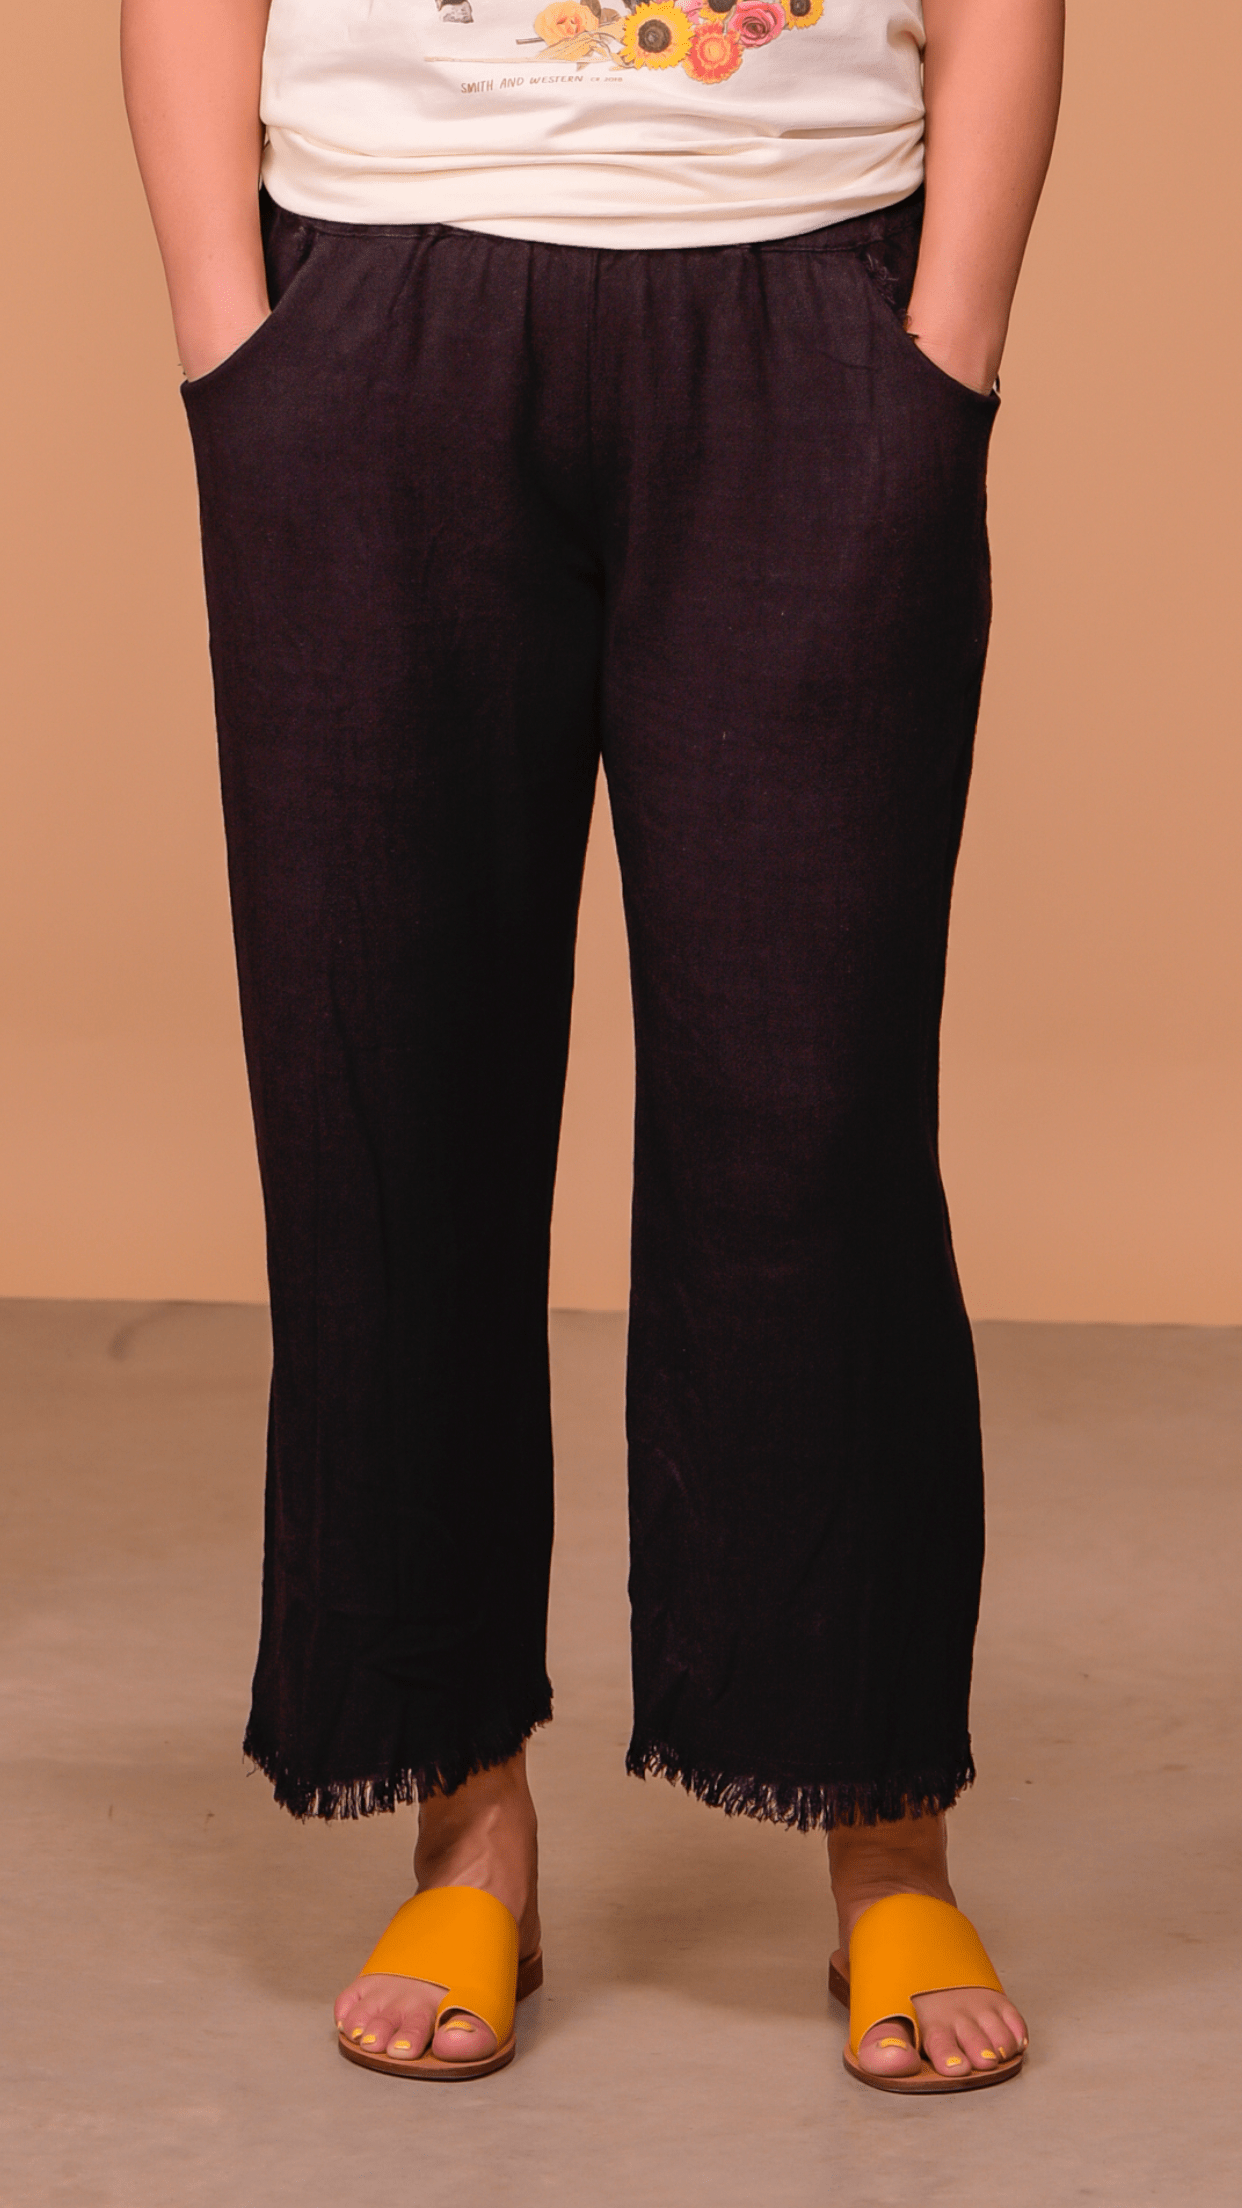 BARREL TROUSERS WITH CUFFED HEMS - Black